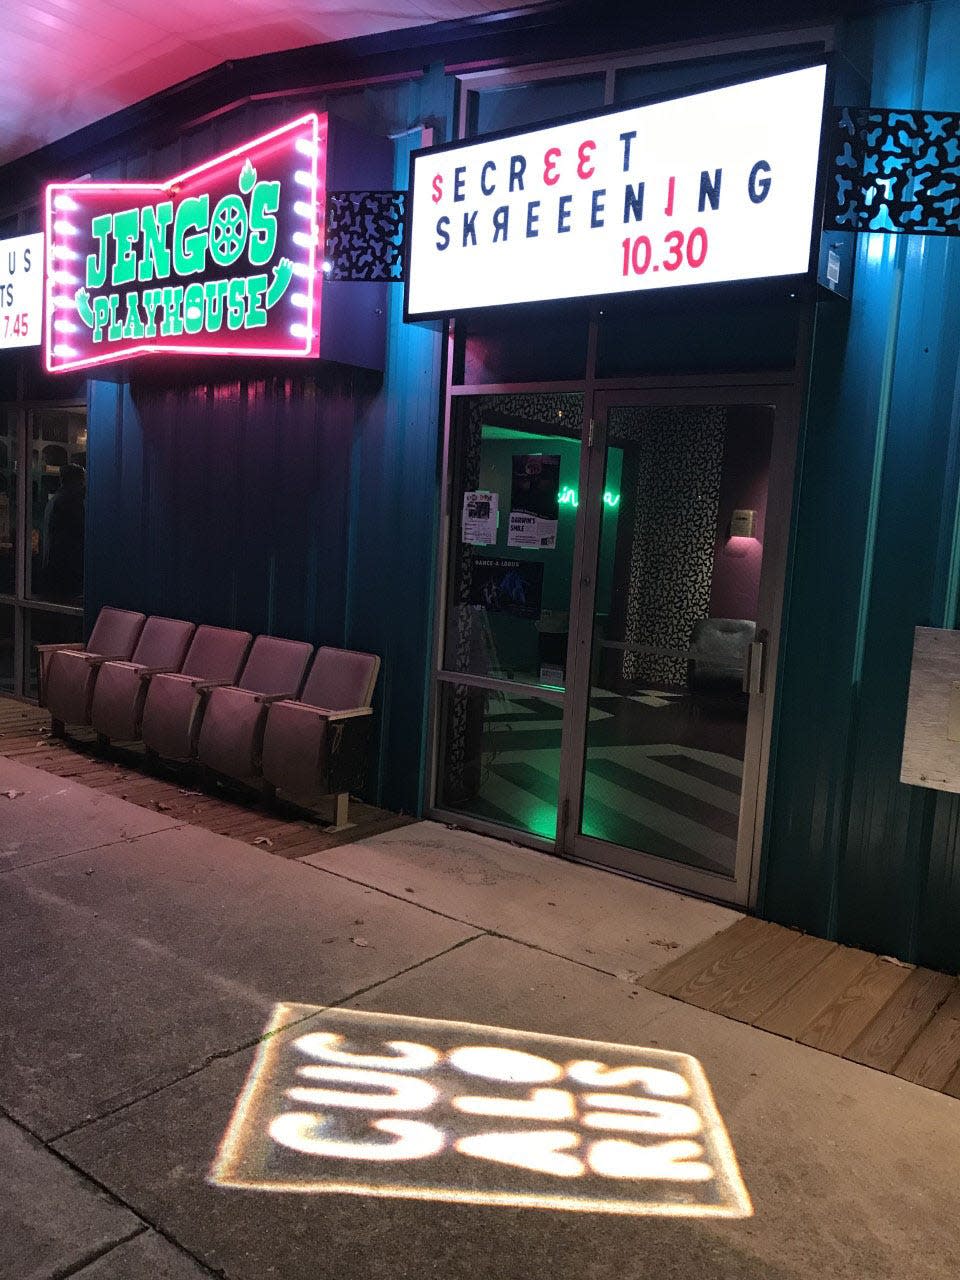 Cucalorus Film Festival home base Jengo's Playhouse hosted a "secret screening" on the festival's opening night Nov. 16.